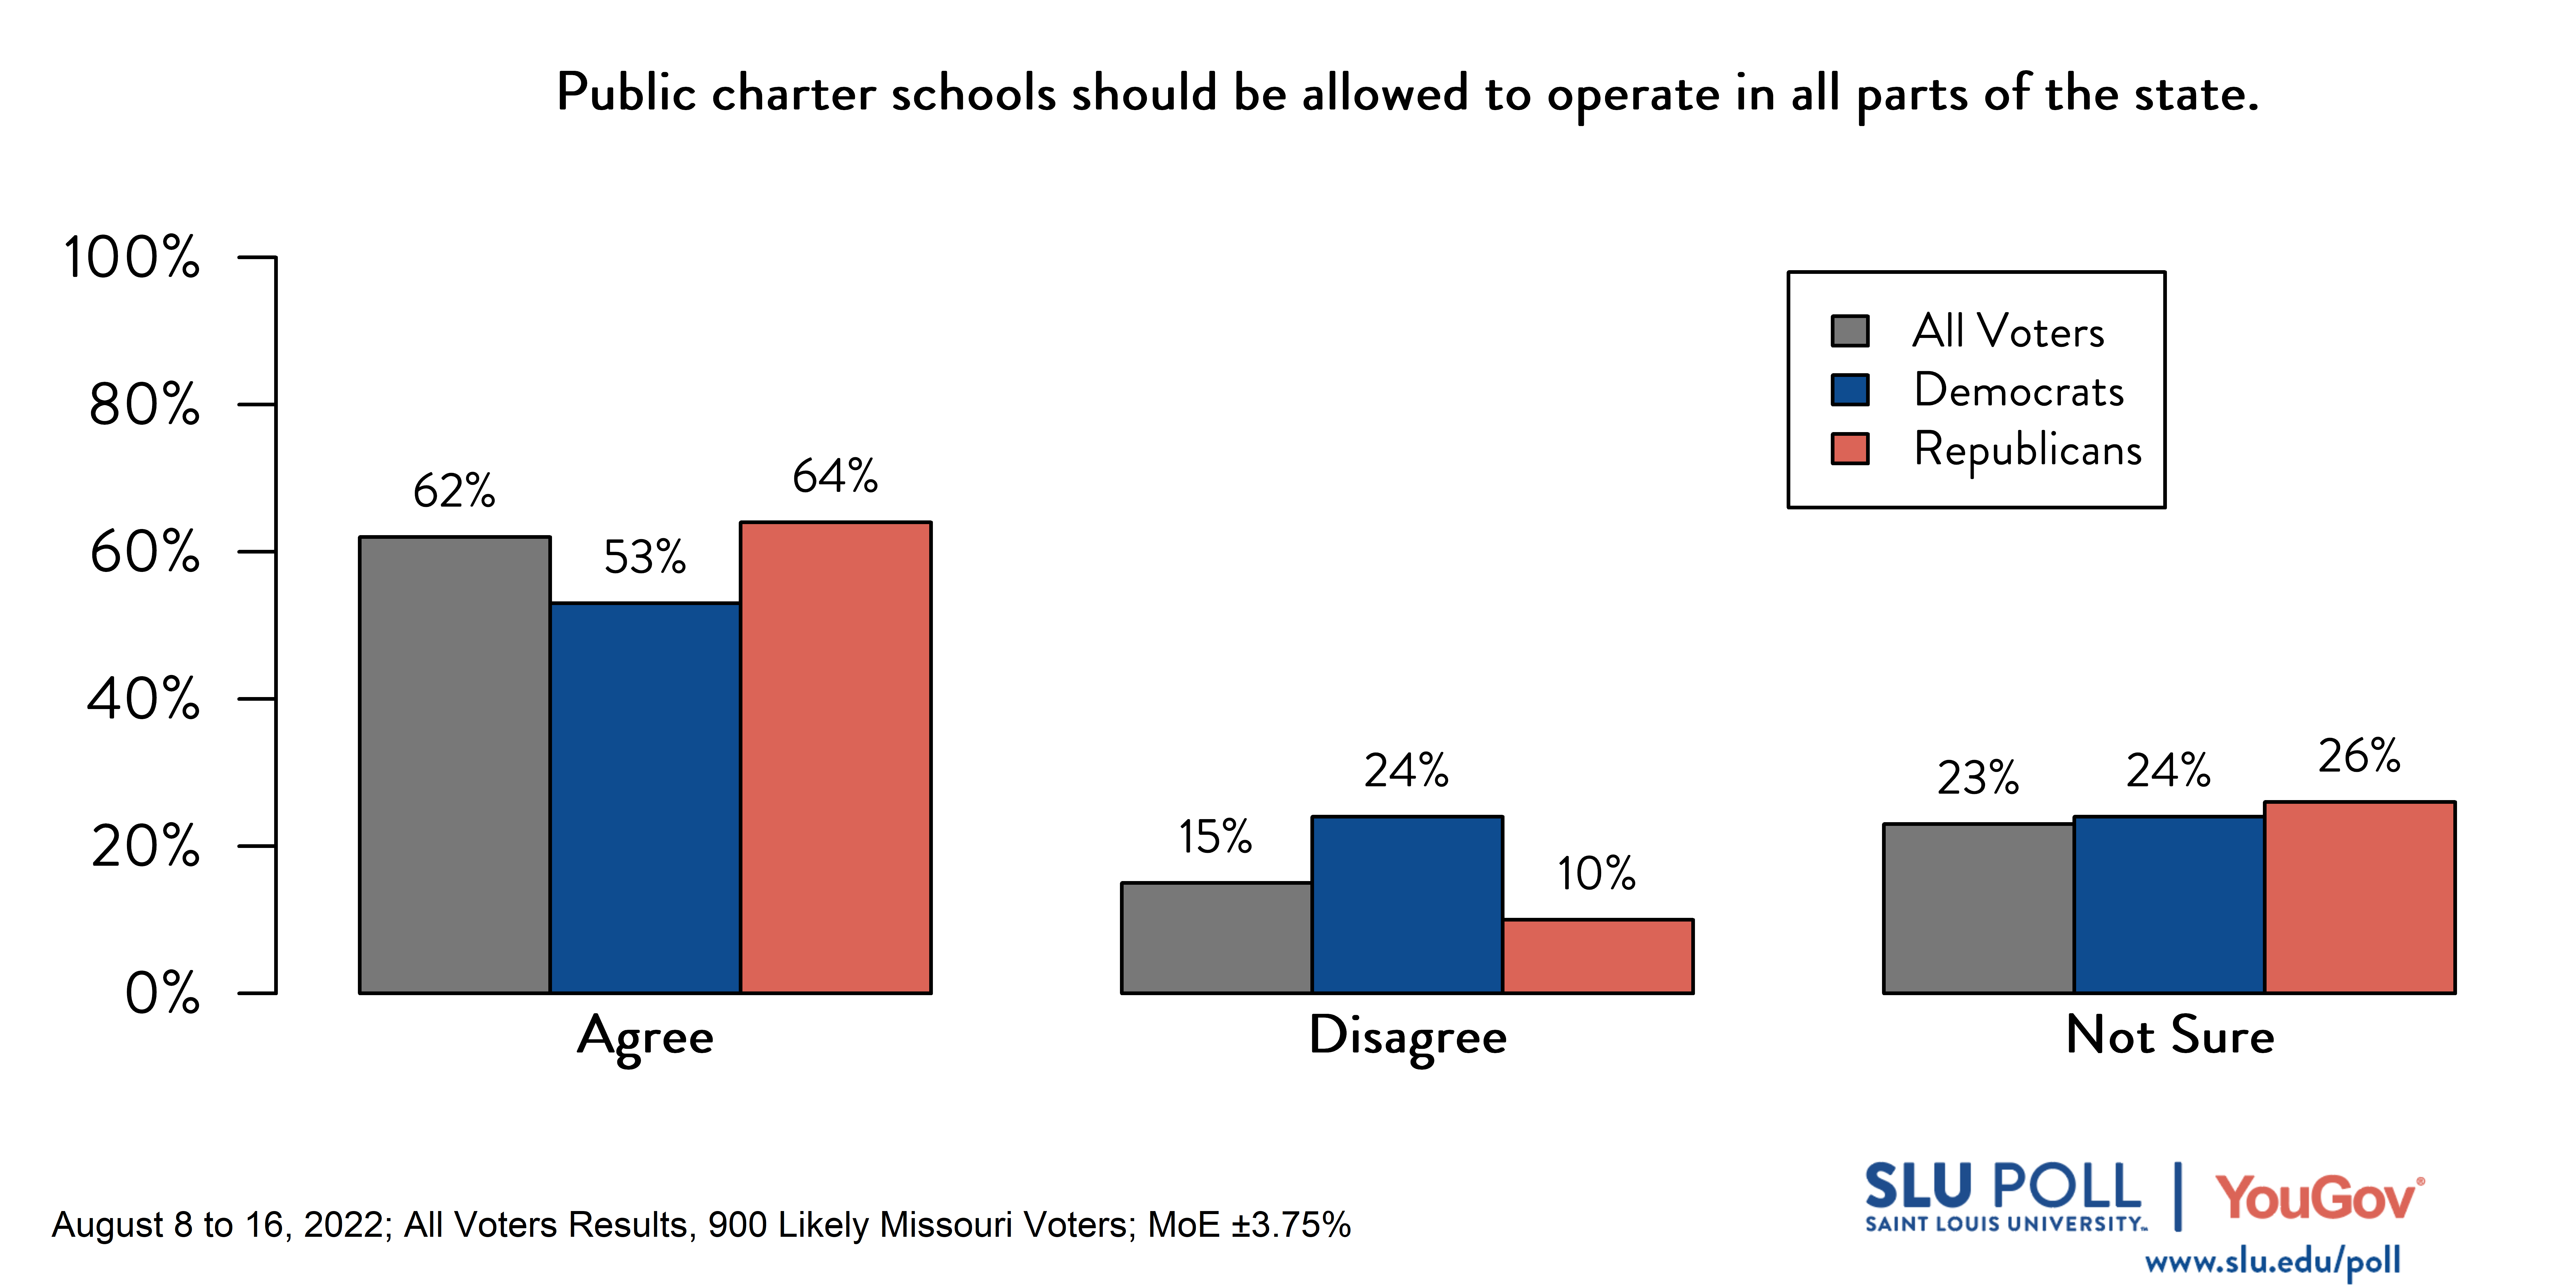 Likely voters' responses to 'Do you agree or disagree with the following statements?Public charter schools should be allowed to operate in all parts of the state.': 62% Agree, 15% Disagree, and 23% Not Sure. Democratic voters' responses: ' 53% Agree, 24% Disagree, and 24% Not Sure. Republican voters' responses: 64% Agree, 10% Disagree, and 26% Not Sure. 